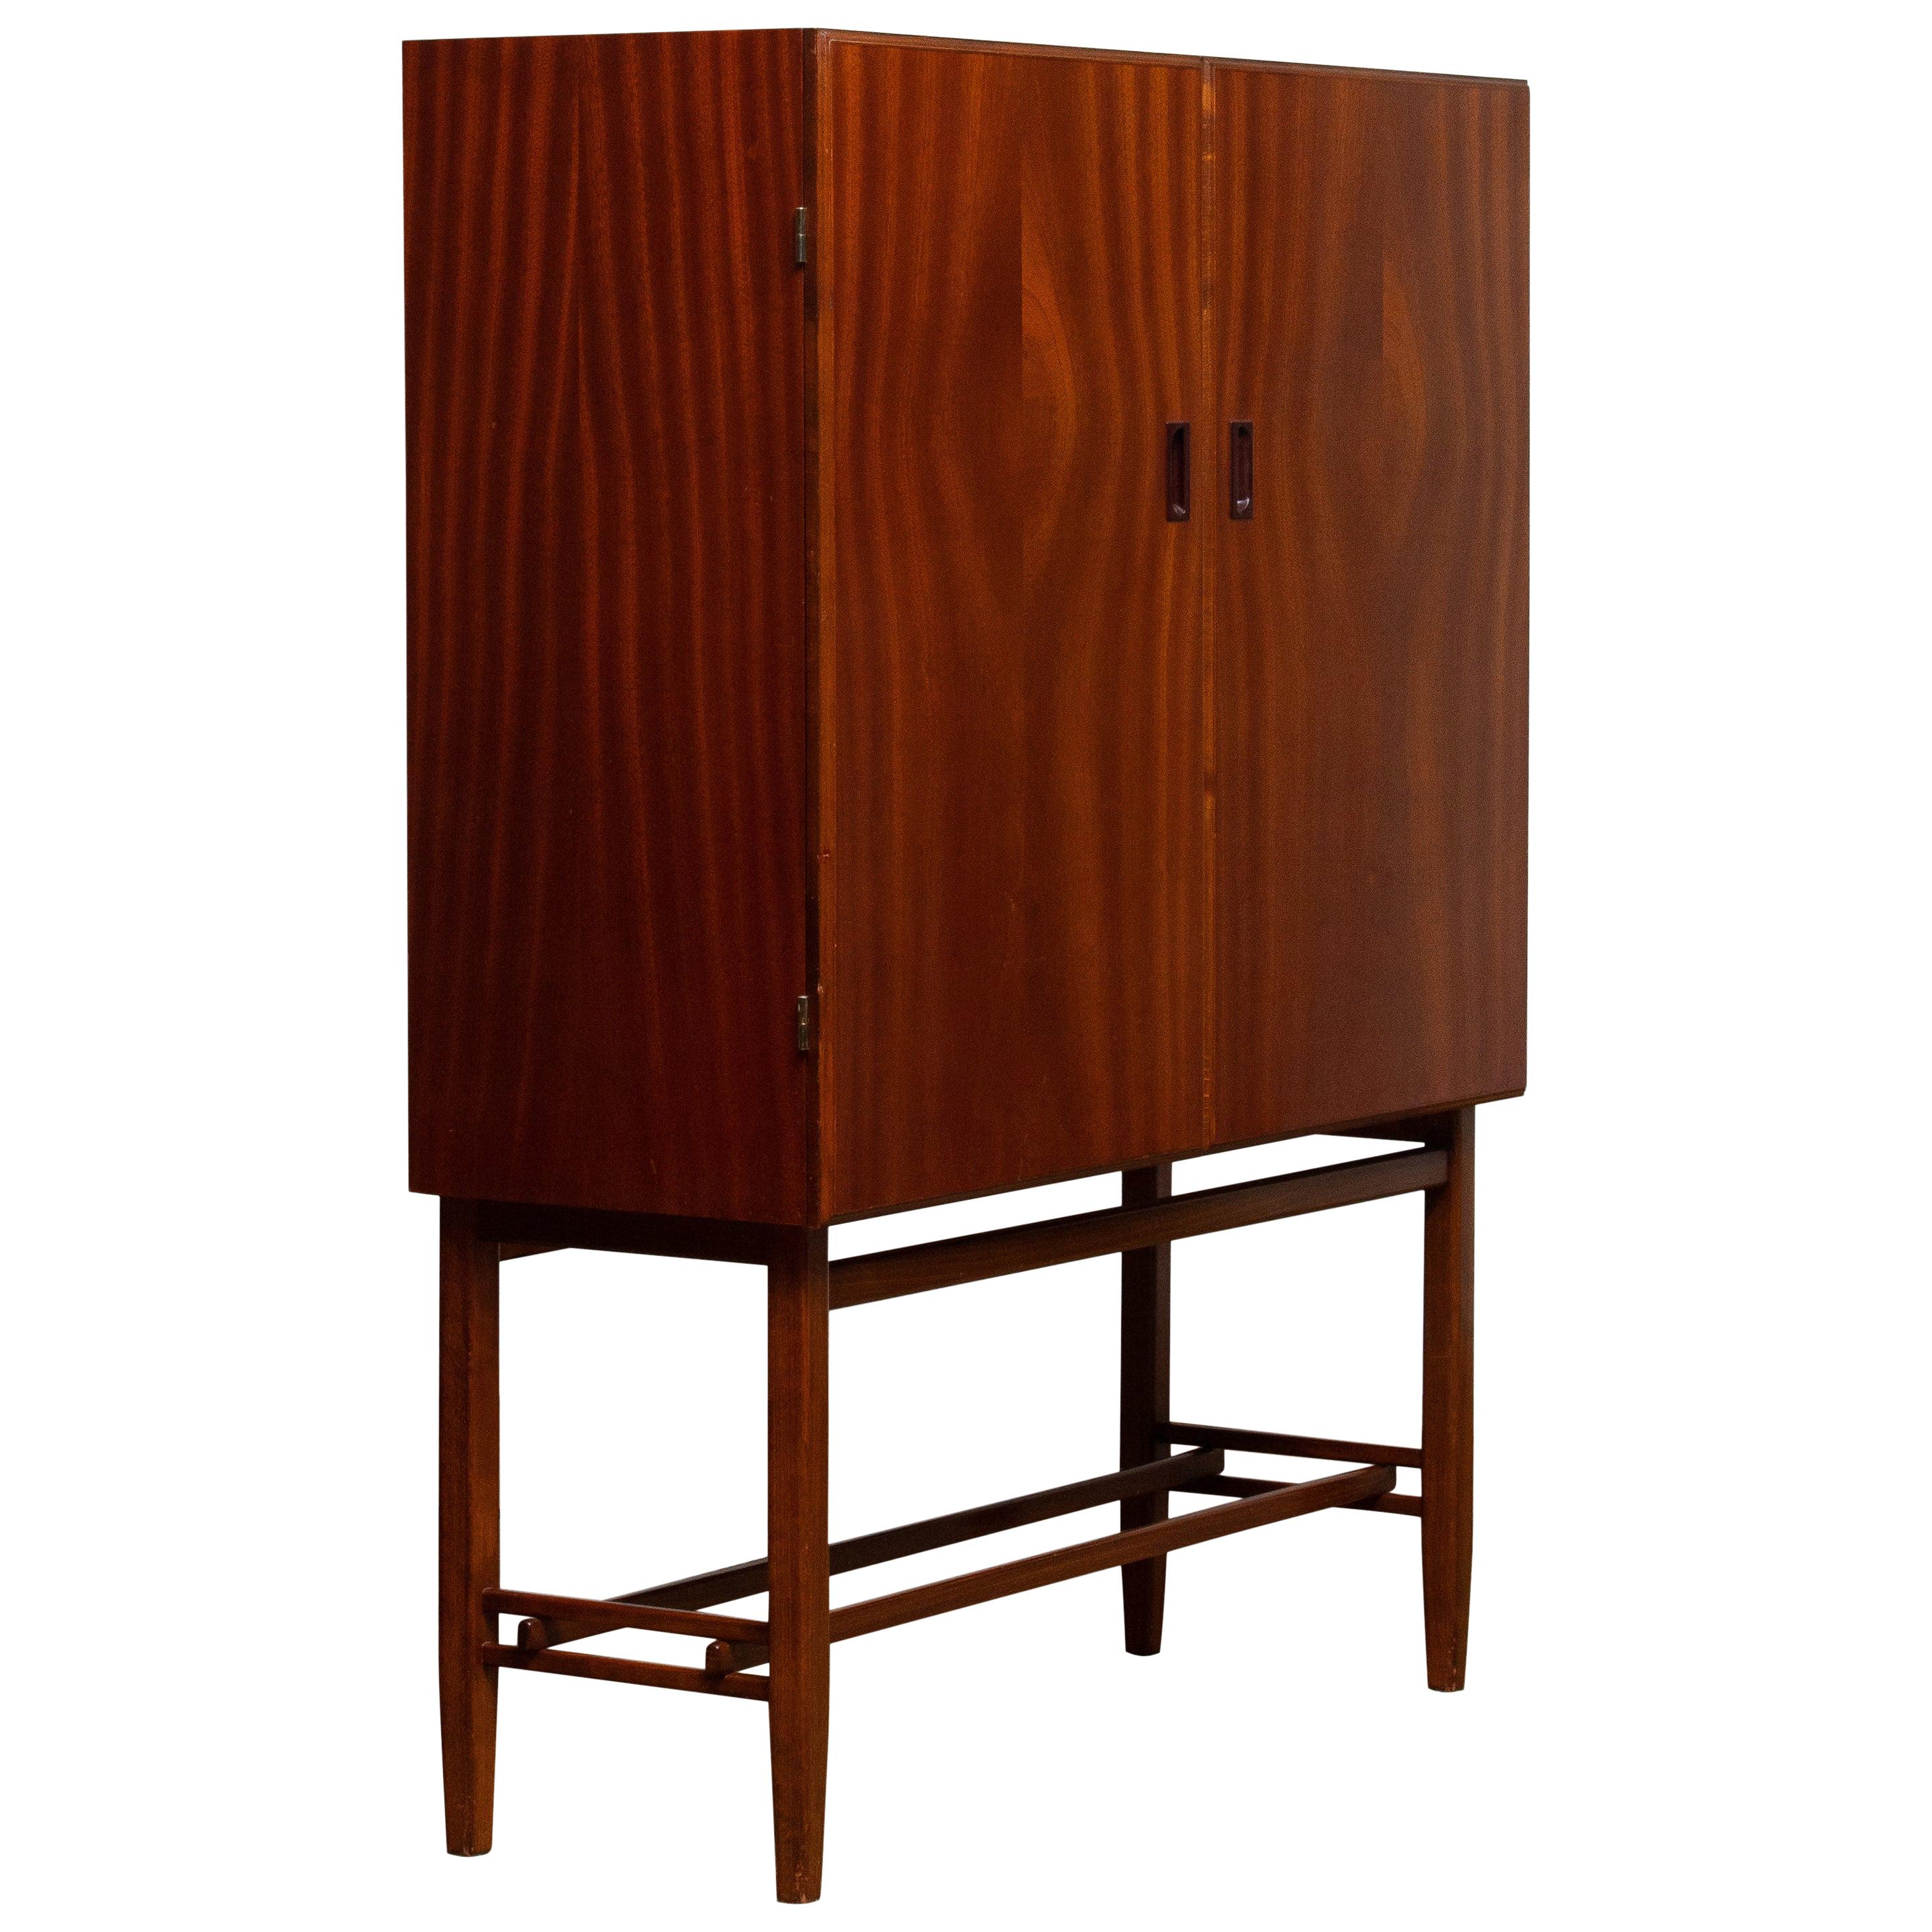 1950s, Slim Midcentury Mahogany Dry Bar / Cabinet by Forenades Mobler Sweden